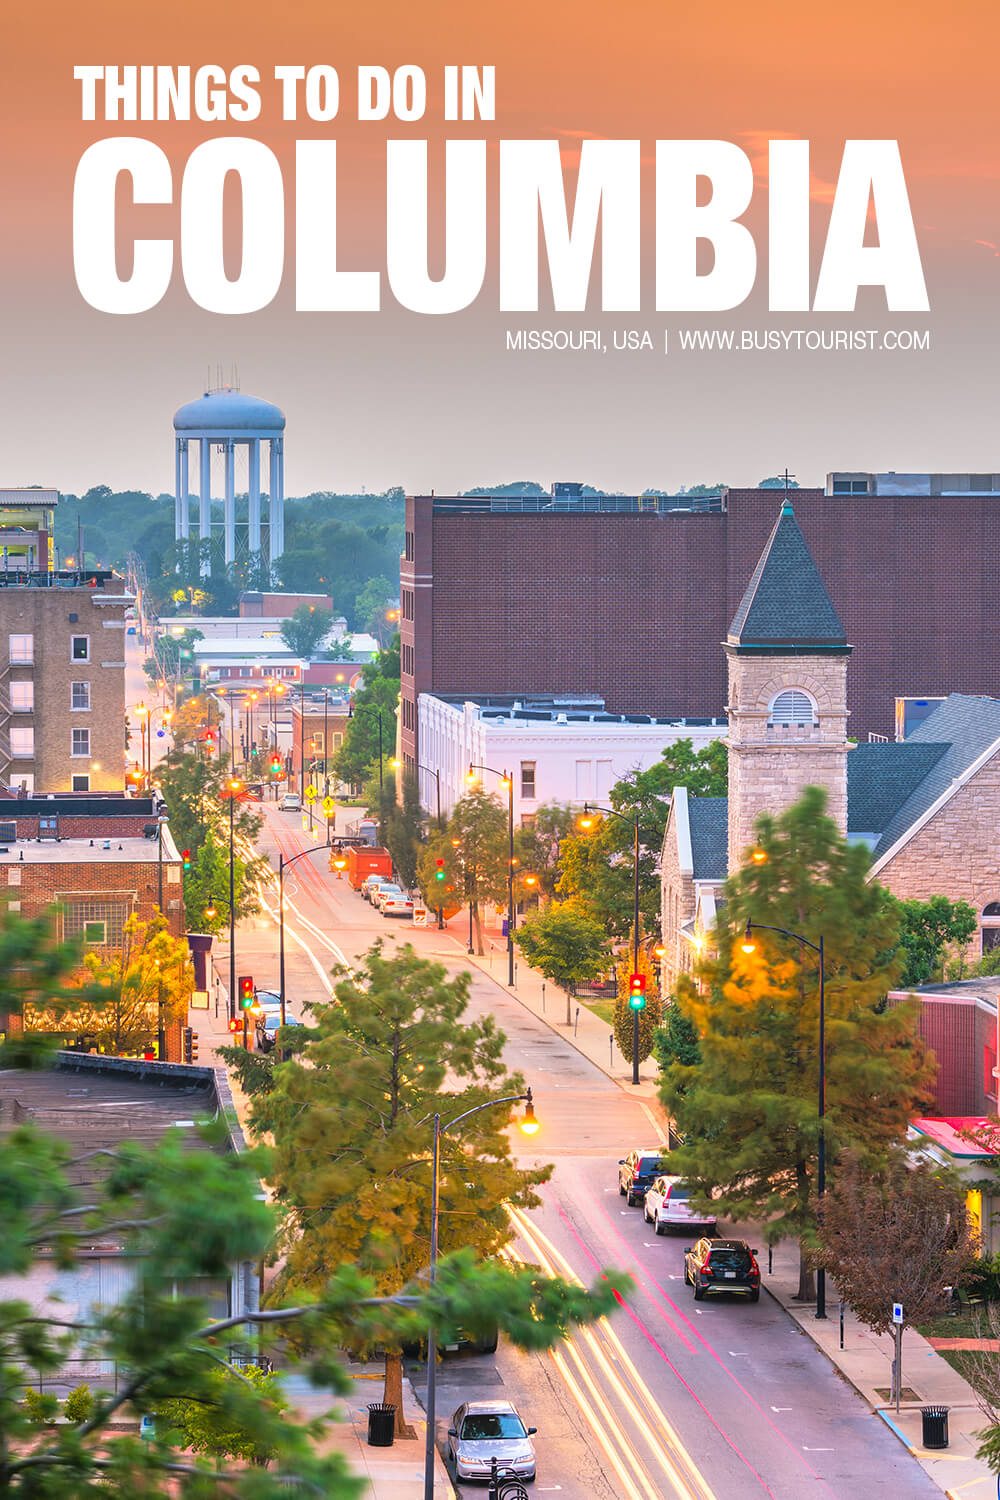 26 Fun Things To Do In Columbia (MO) Attractions & Activities